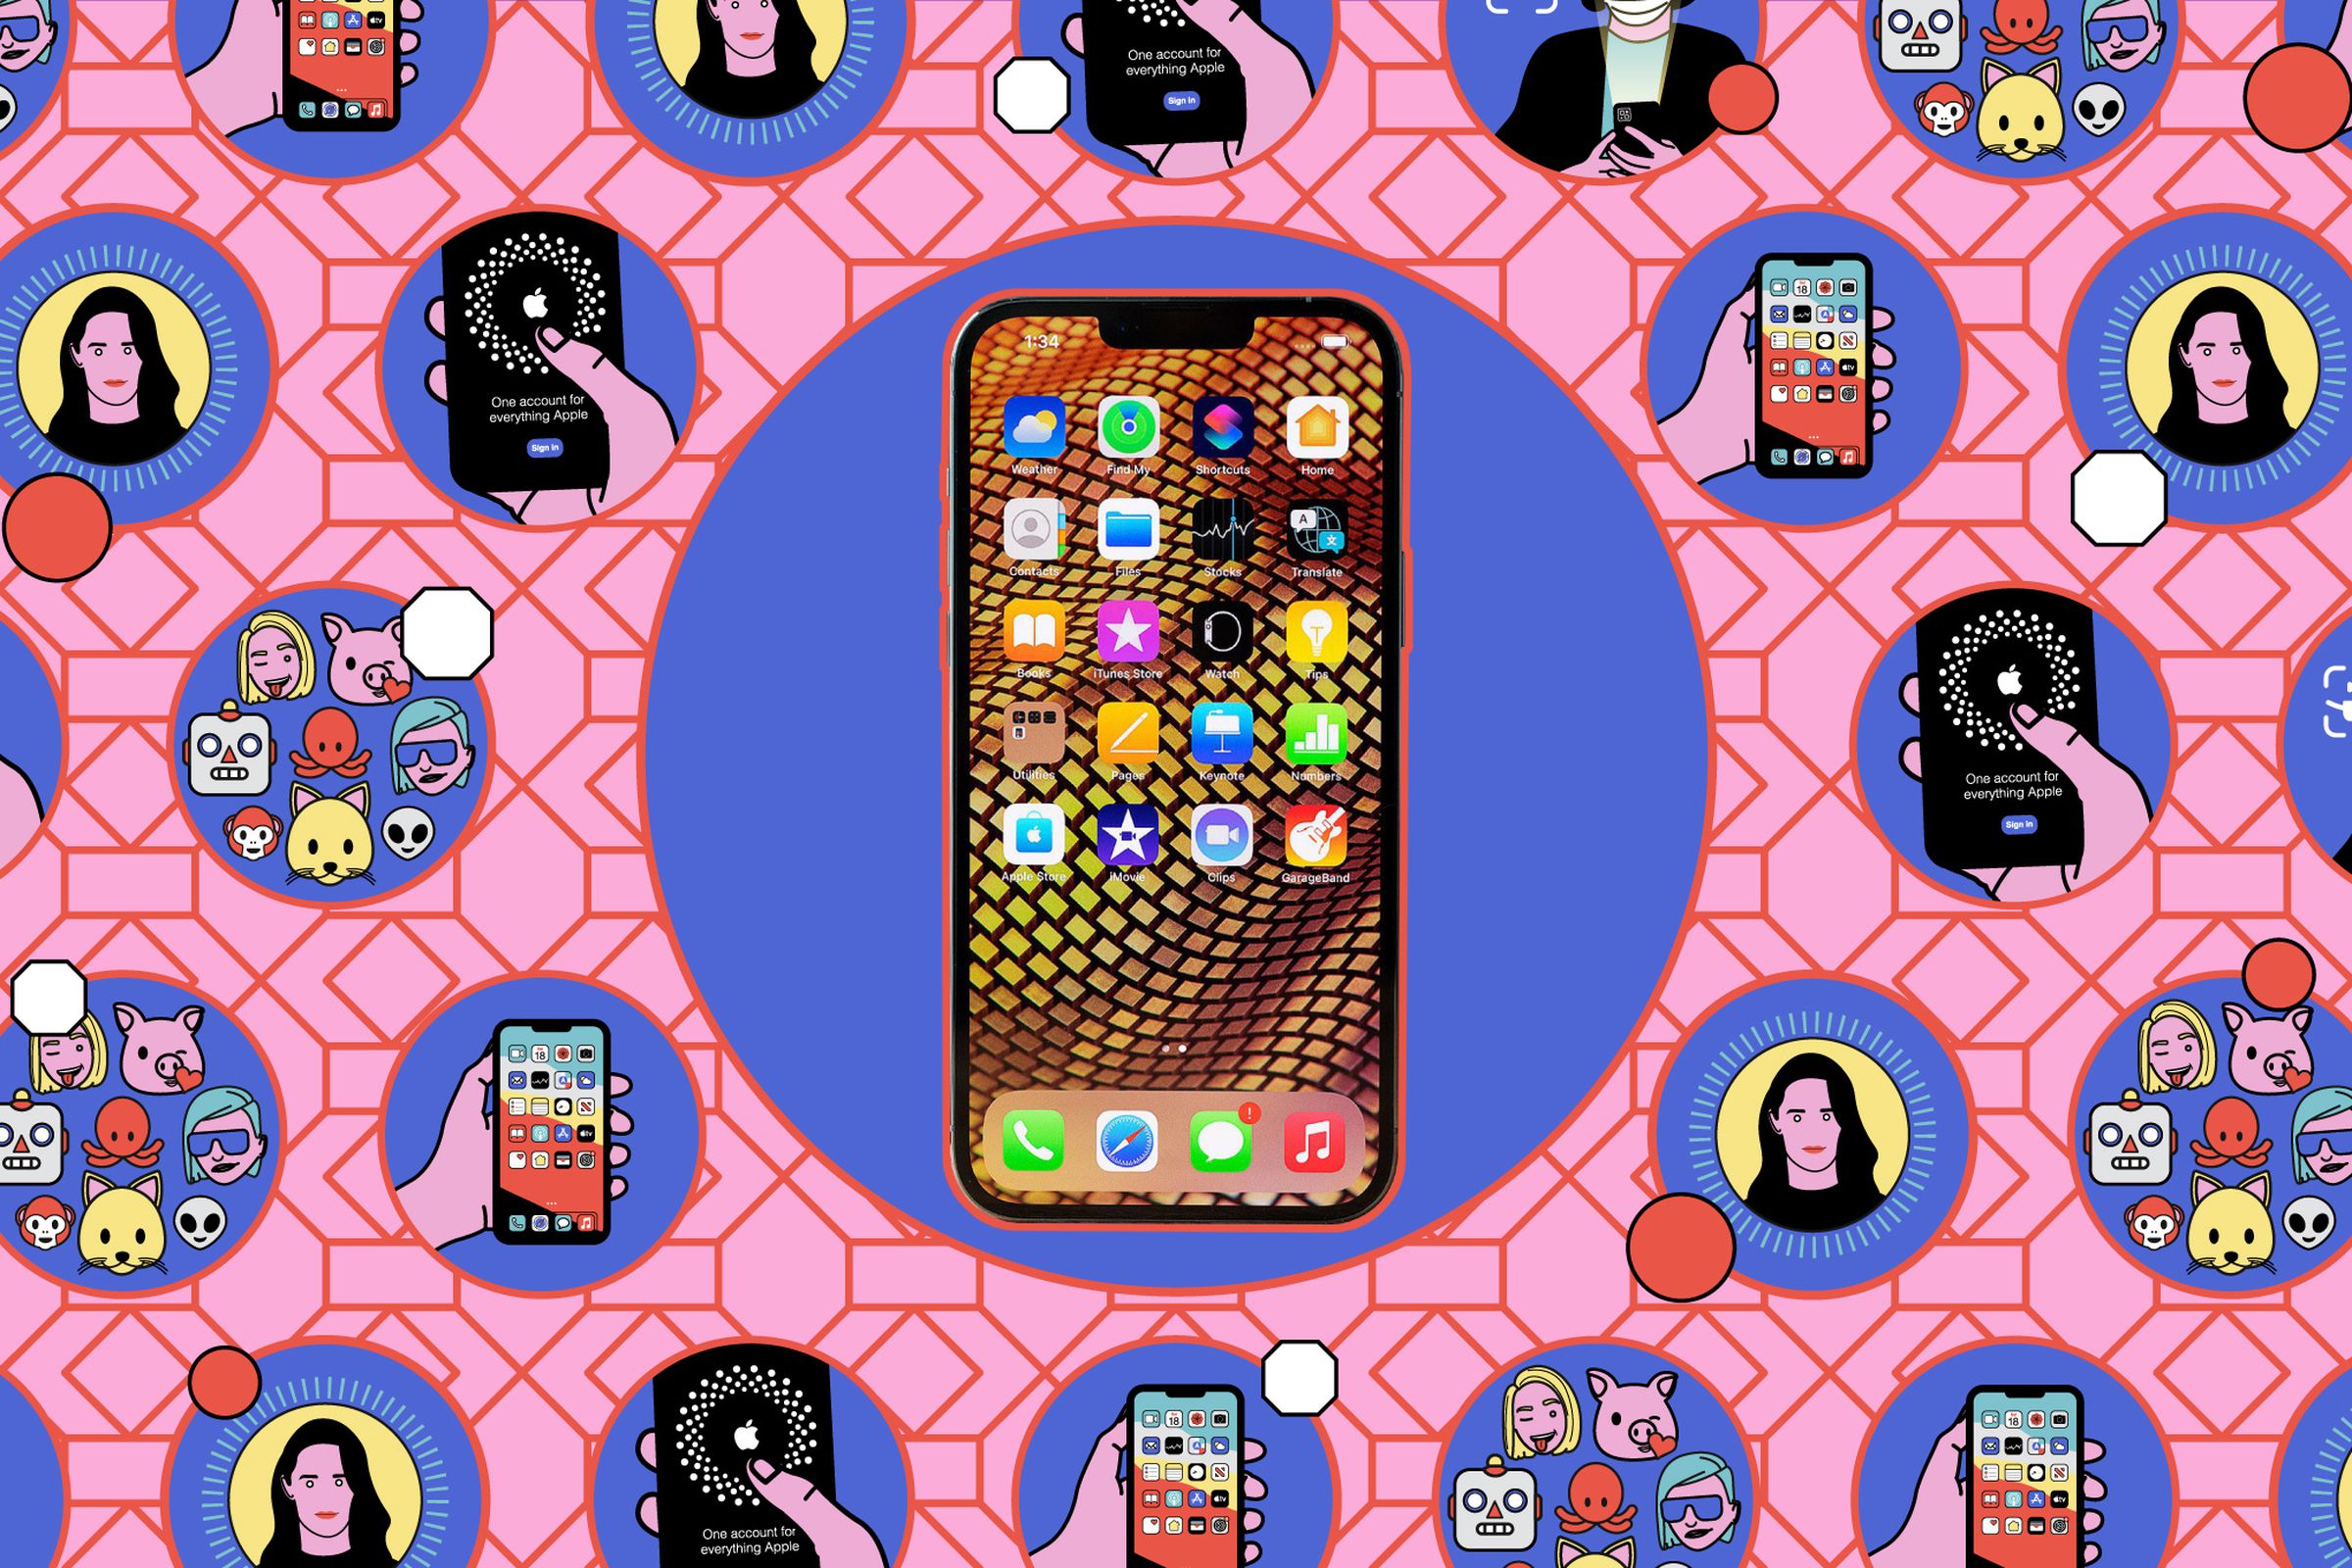 iPhone with homepage icons against an illustrated background